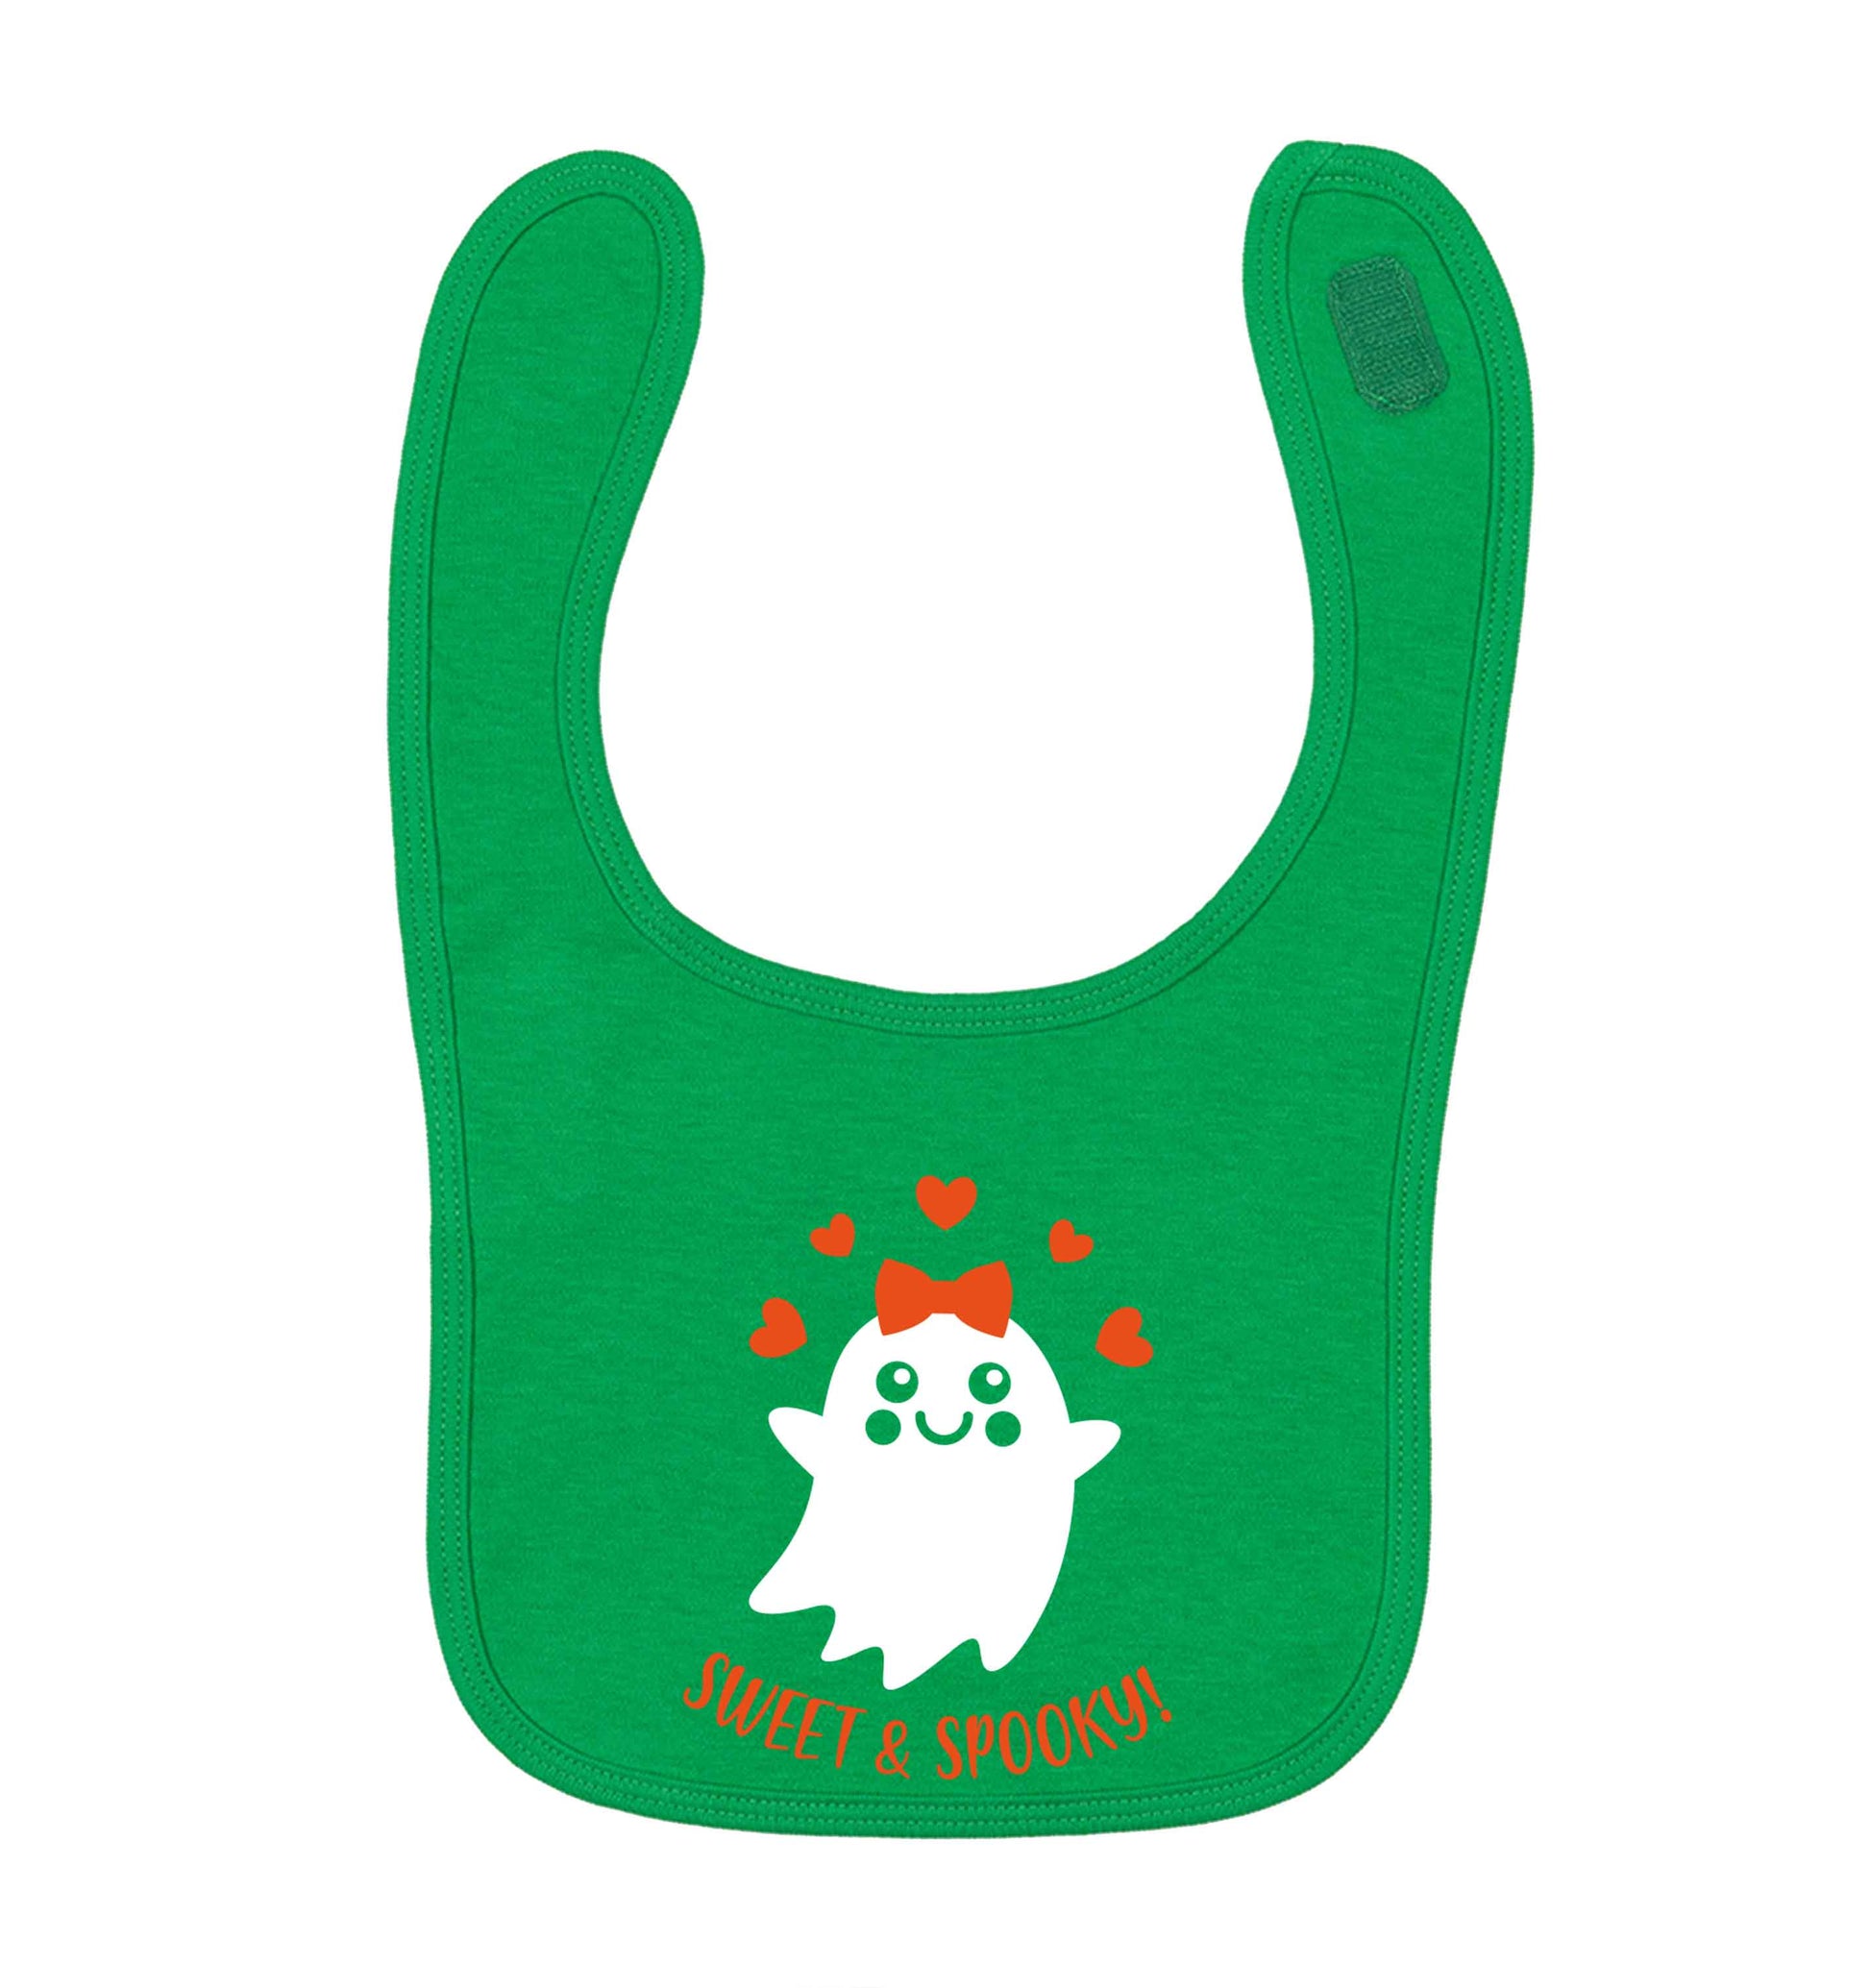 Sweet and spooky green baby bib